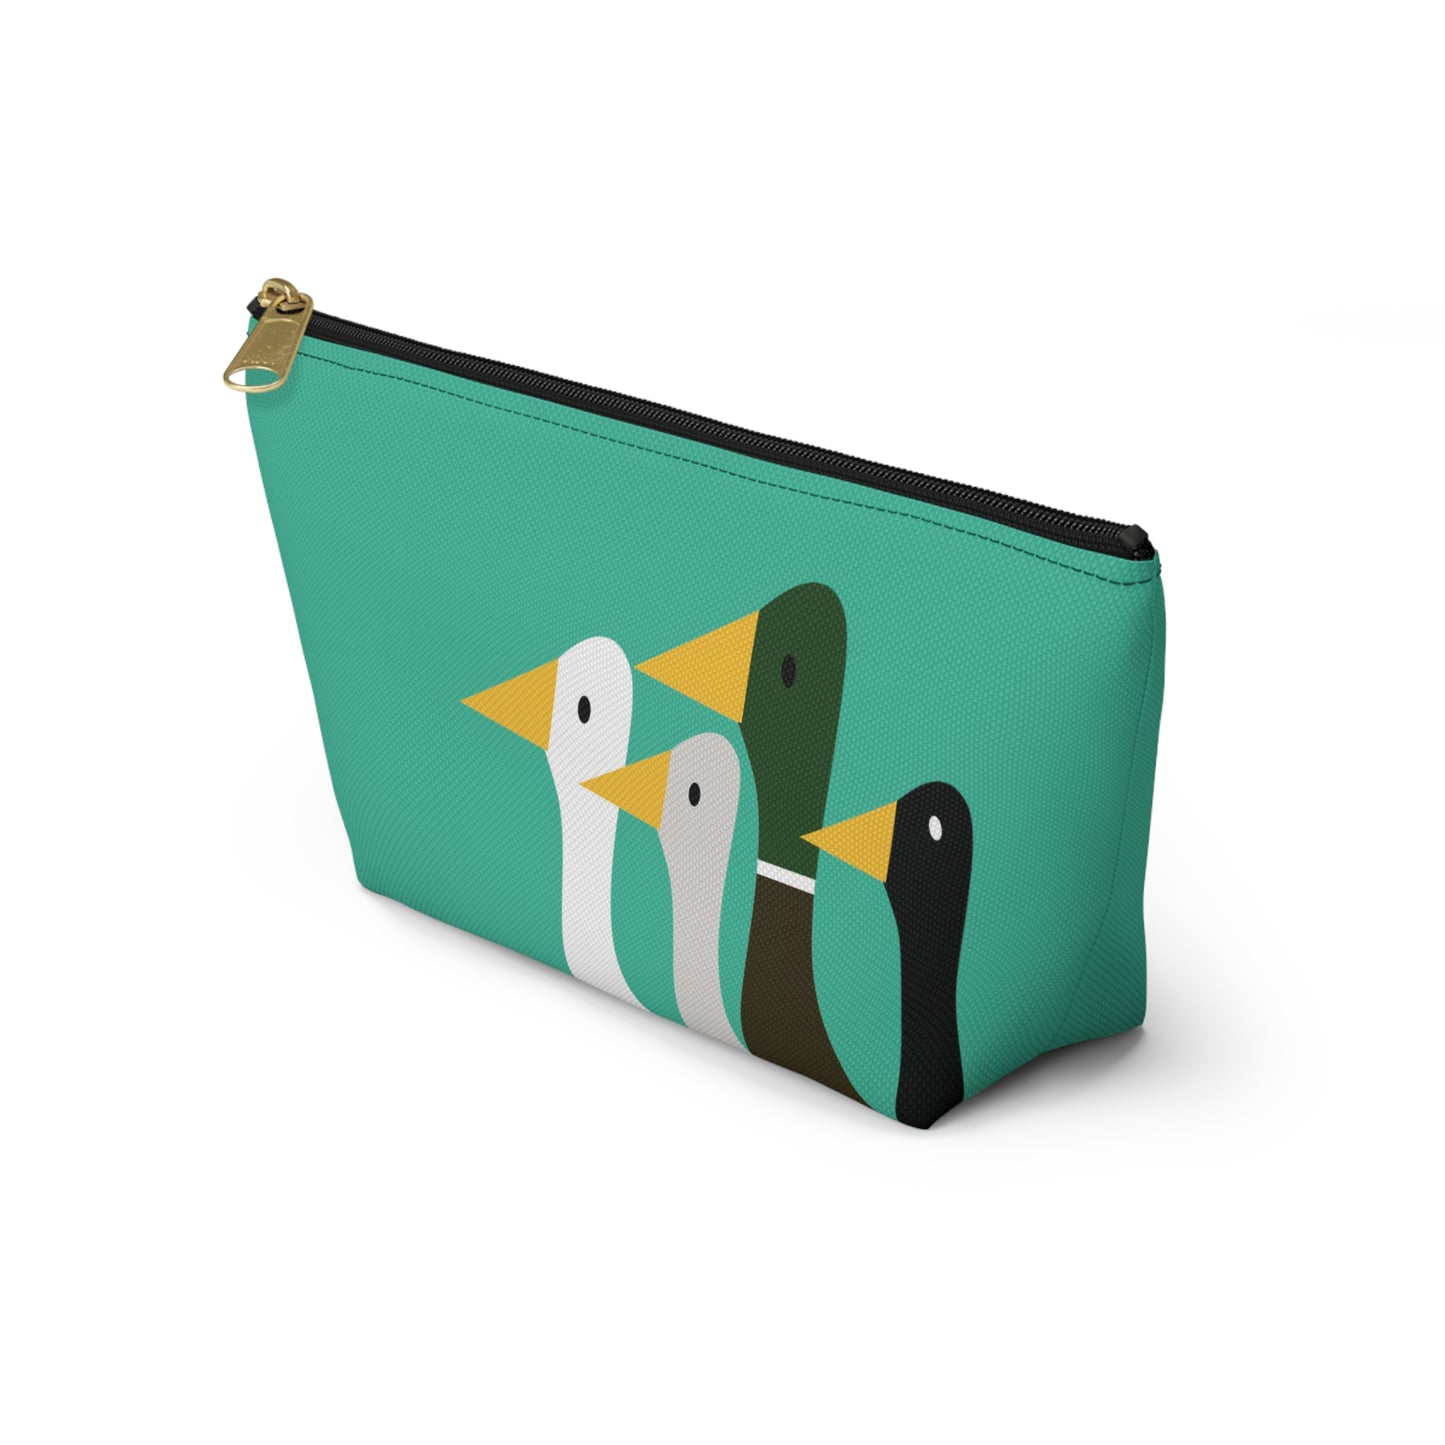 Nifty Ducks Co. Logo2 - ducks - Turquoise 12d3ad - Accessory Pouch w T-bottom